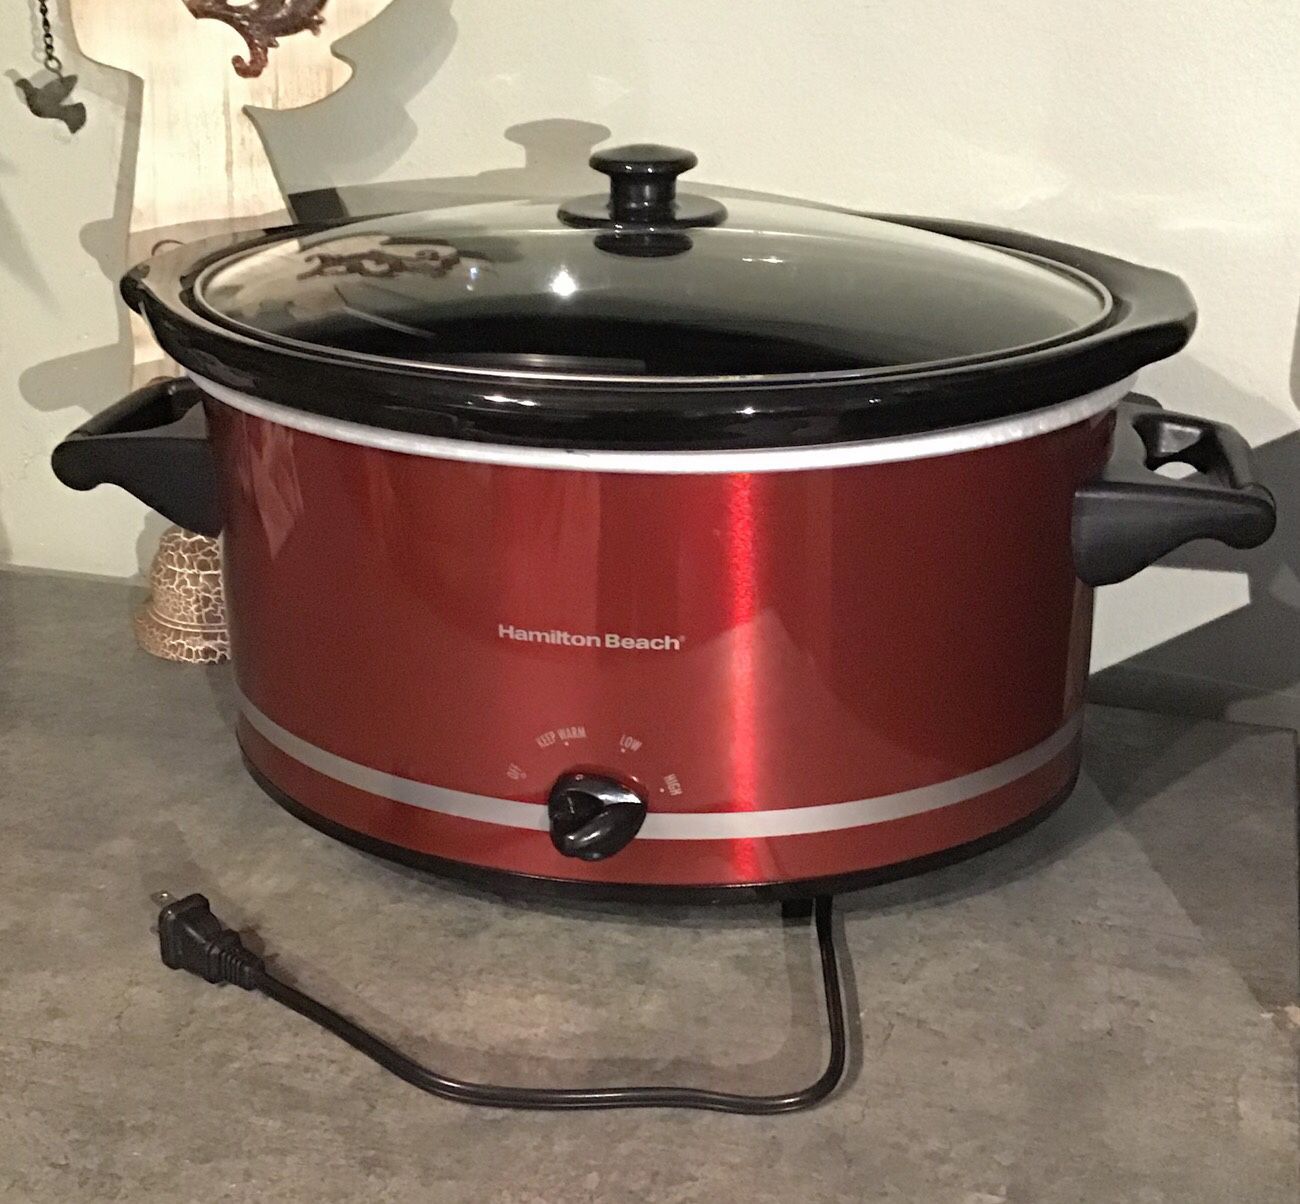 Hamilton Beach 8-Quart Oval Slow Cooker, Red Used: Like New